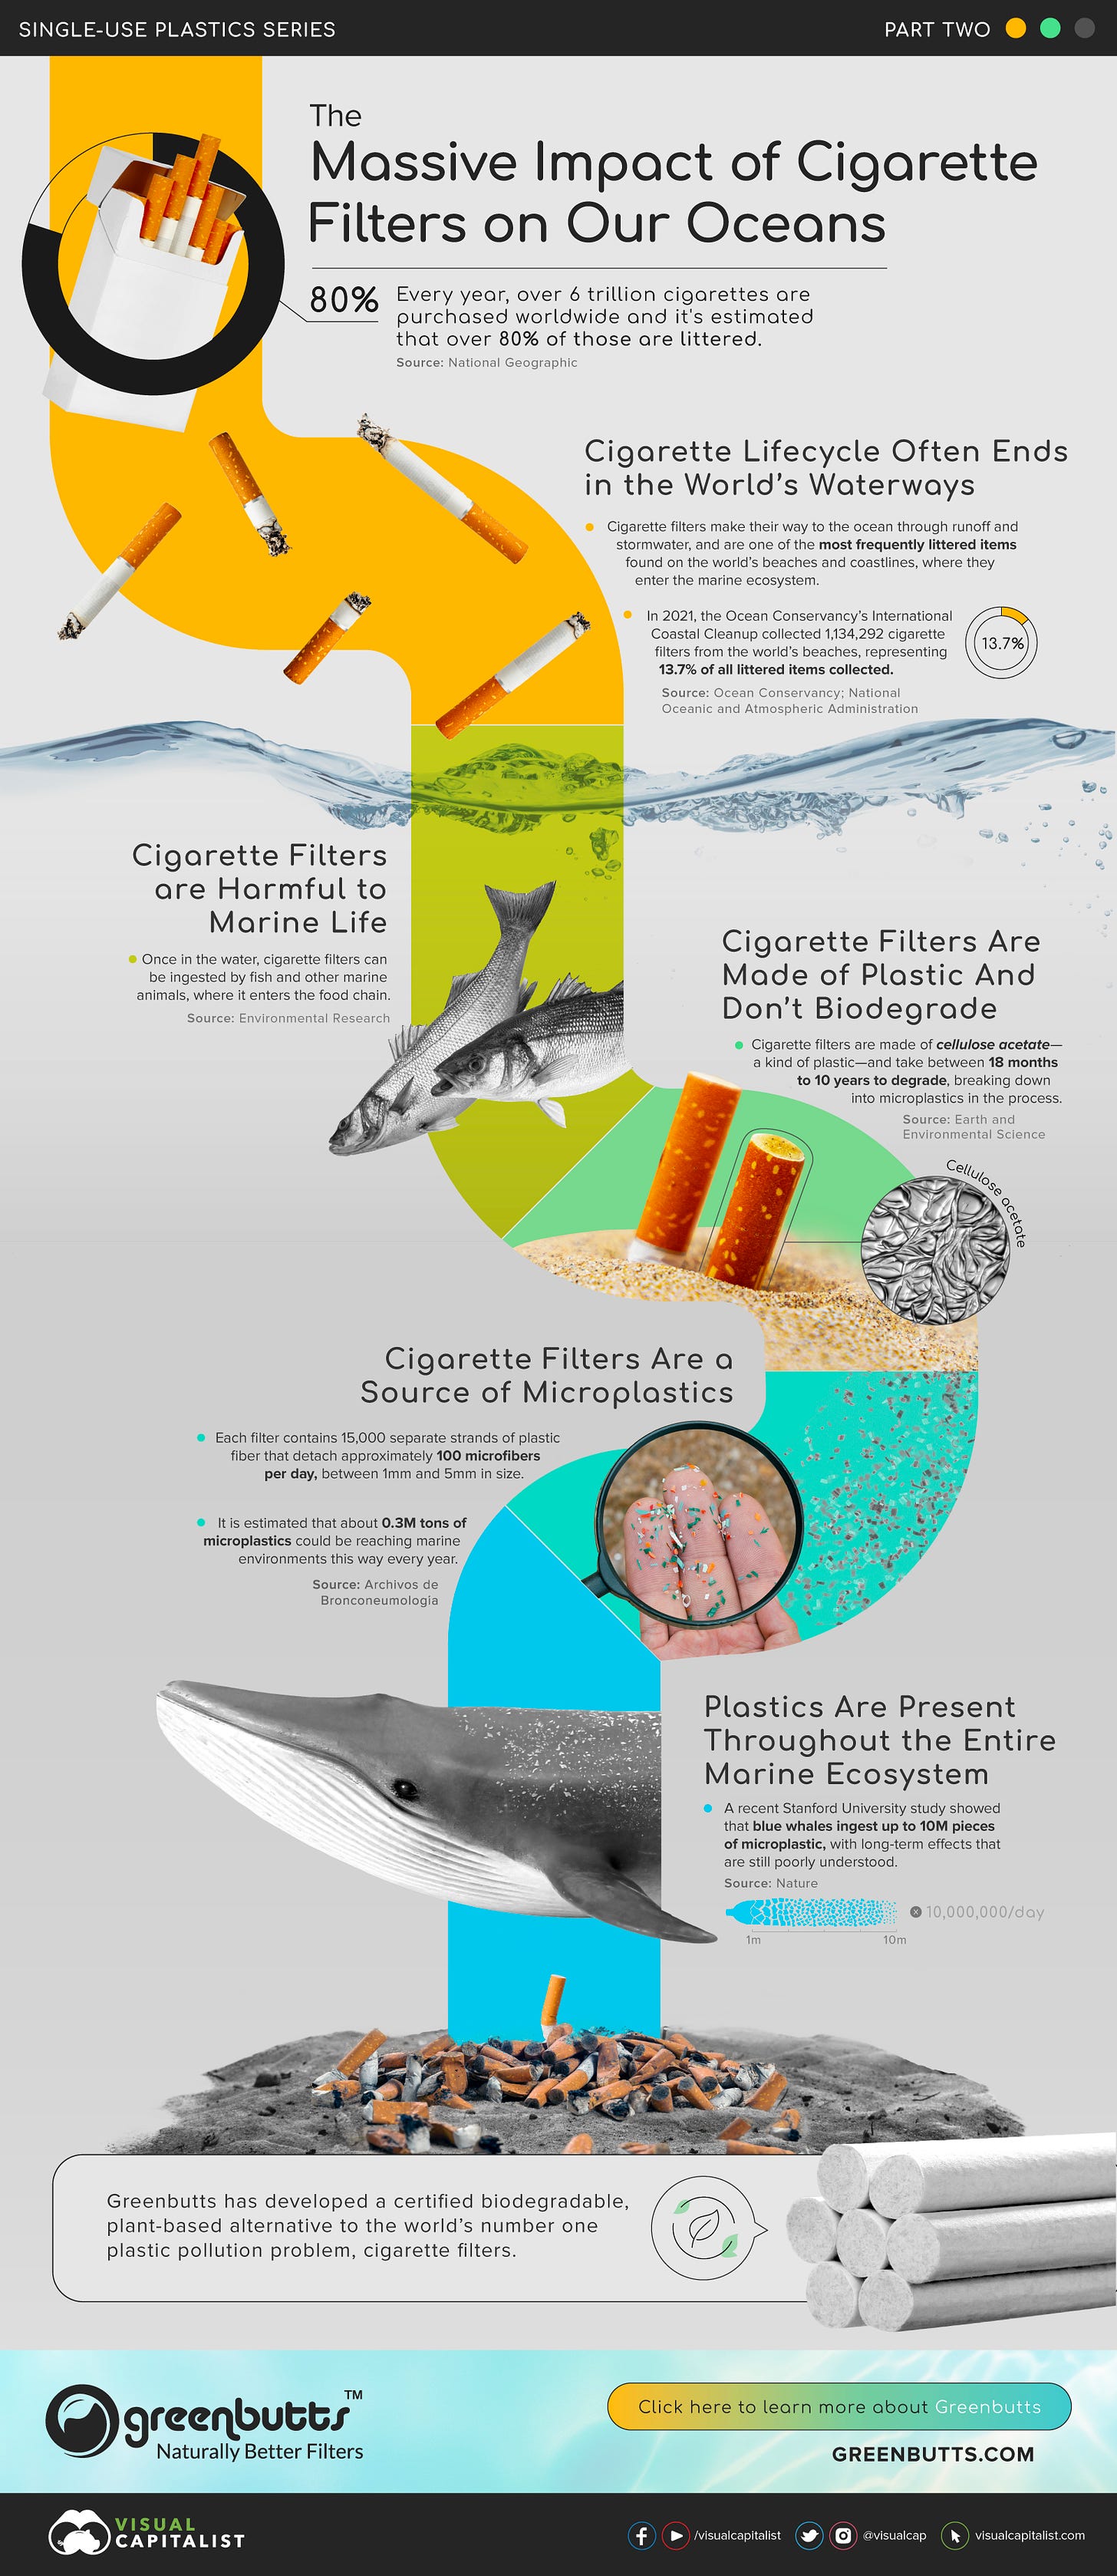 Infographic showing the various ways plastic cigarettes harm ocean life and environments